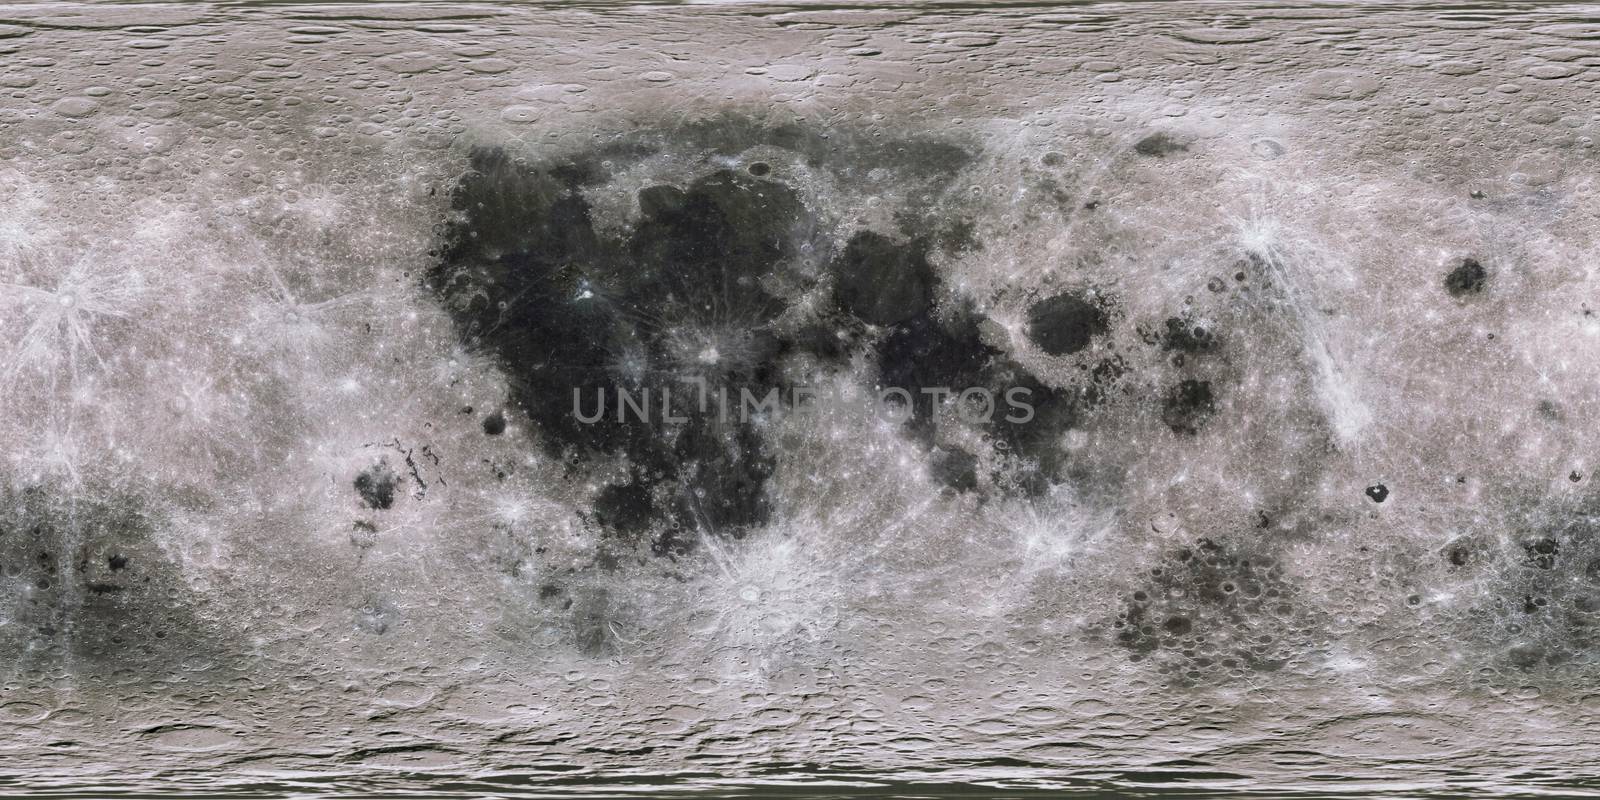 Moon surface in expanded view